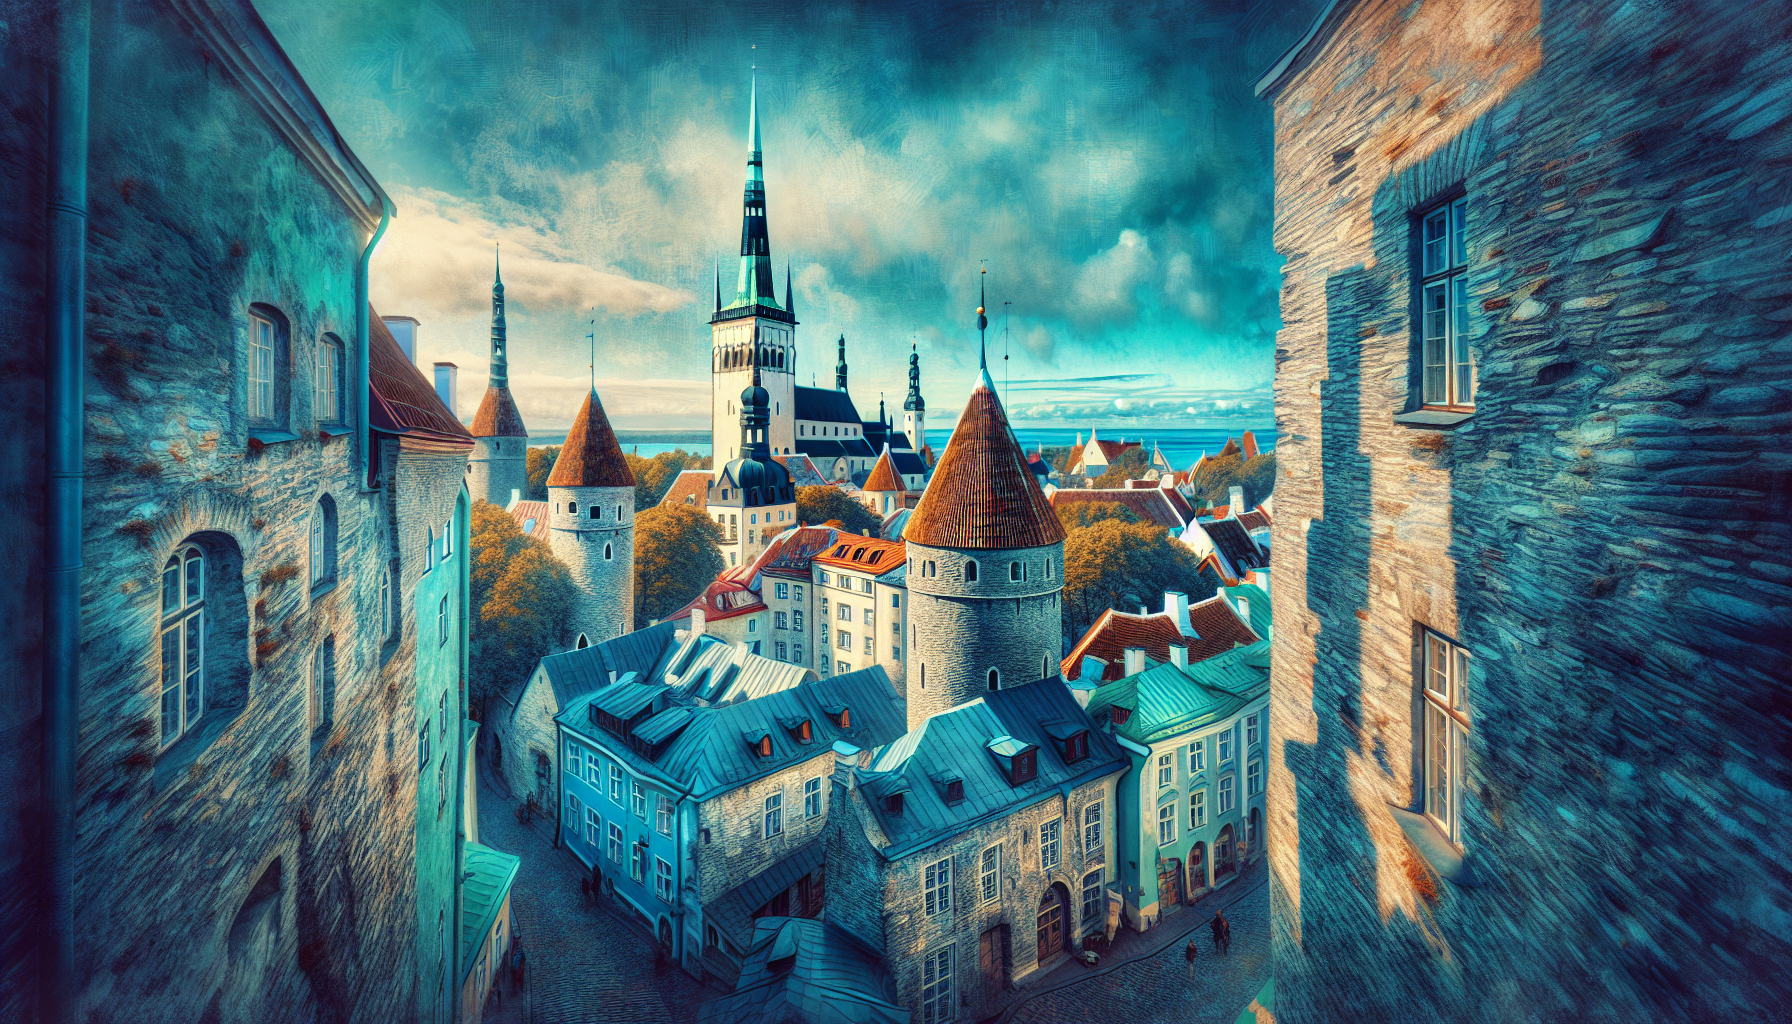 explore the best places to visit in europe and discover the rich history of tallinn, estonia. plan your trip to explore the historical wonders of this charming city.